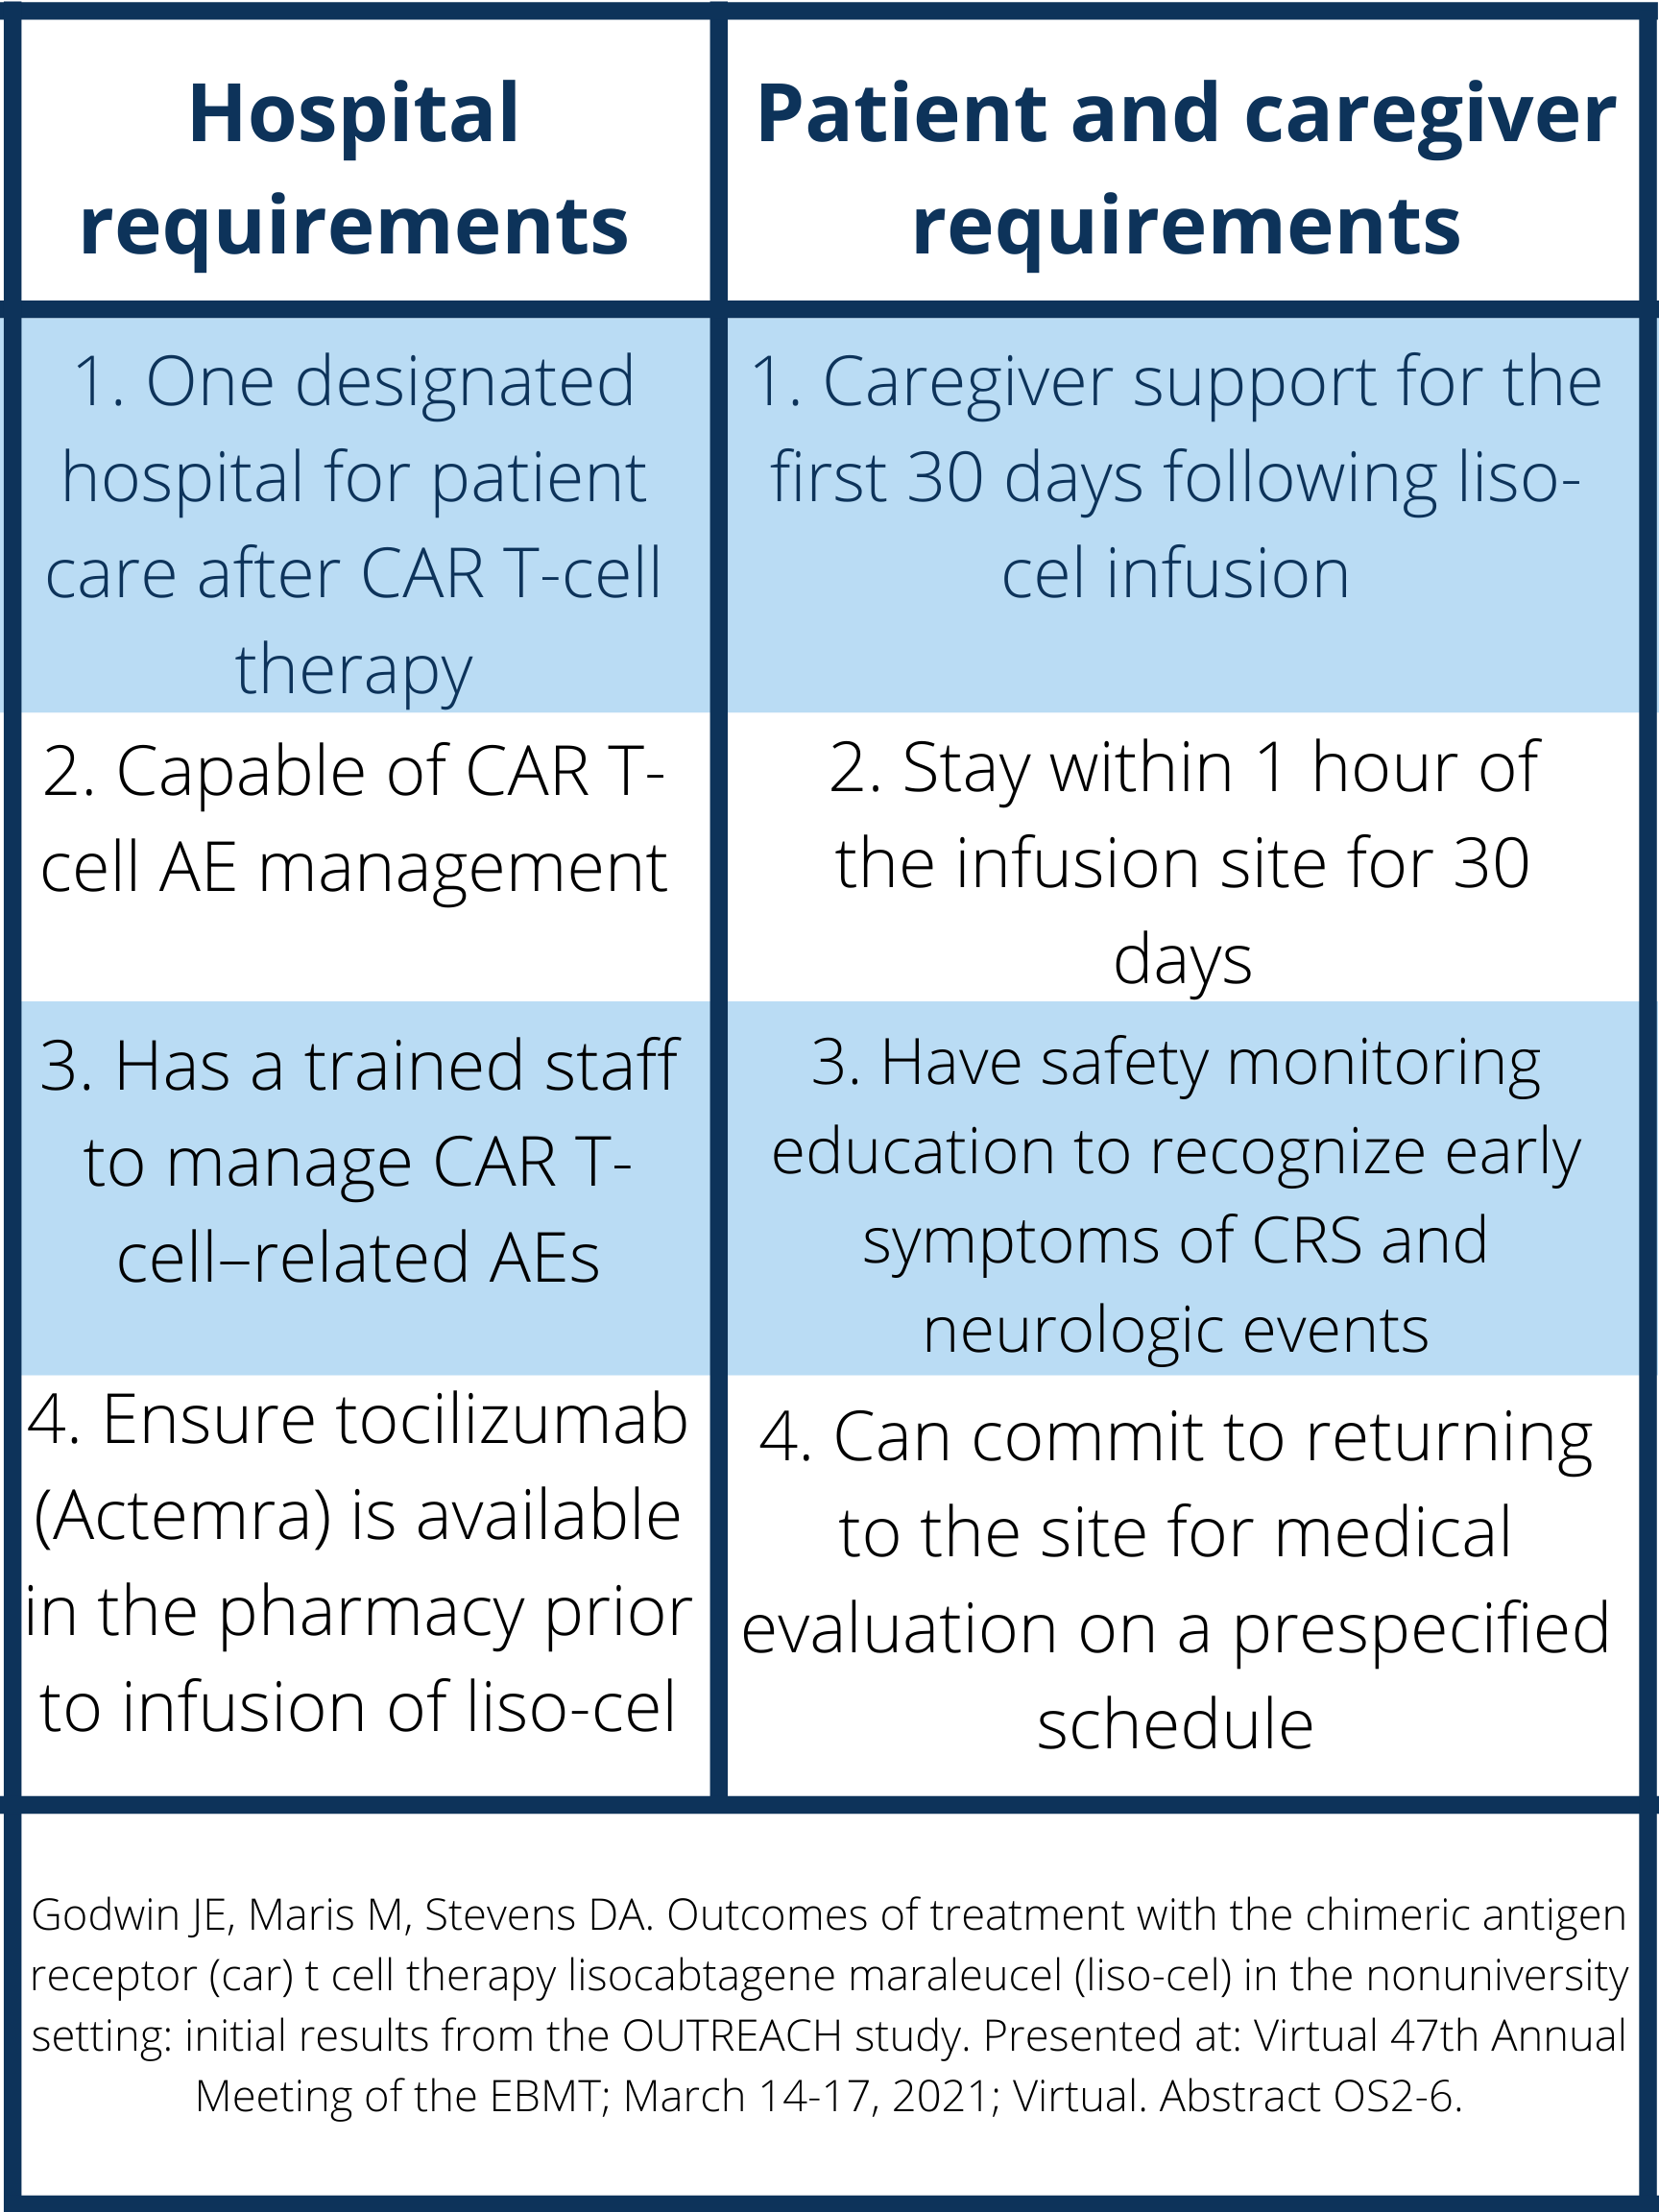 FIGURE2: Hospital requirements and patient and caregiver requirements